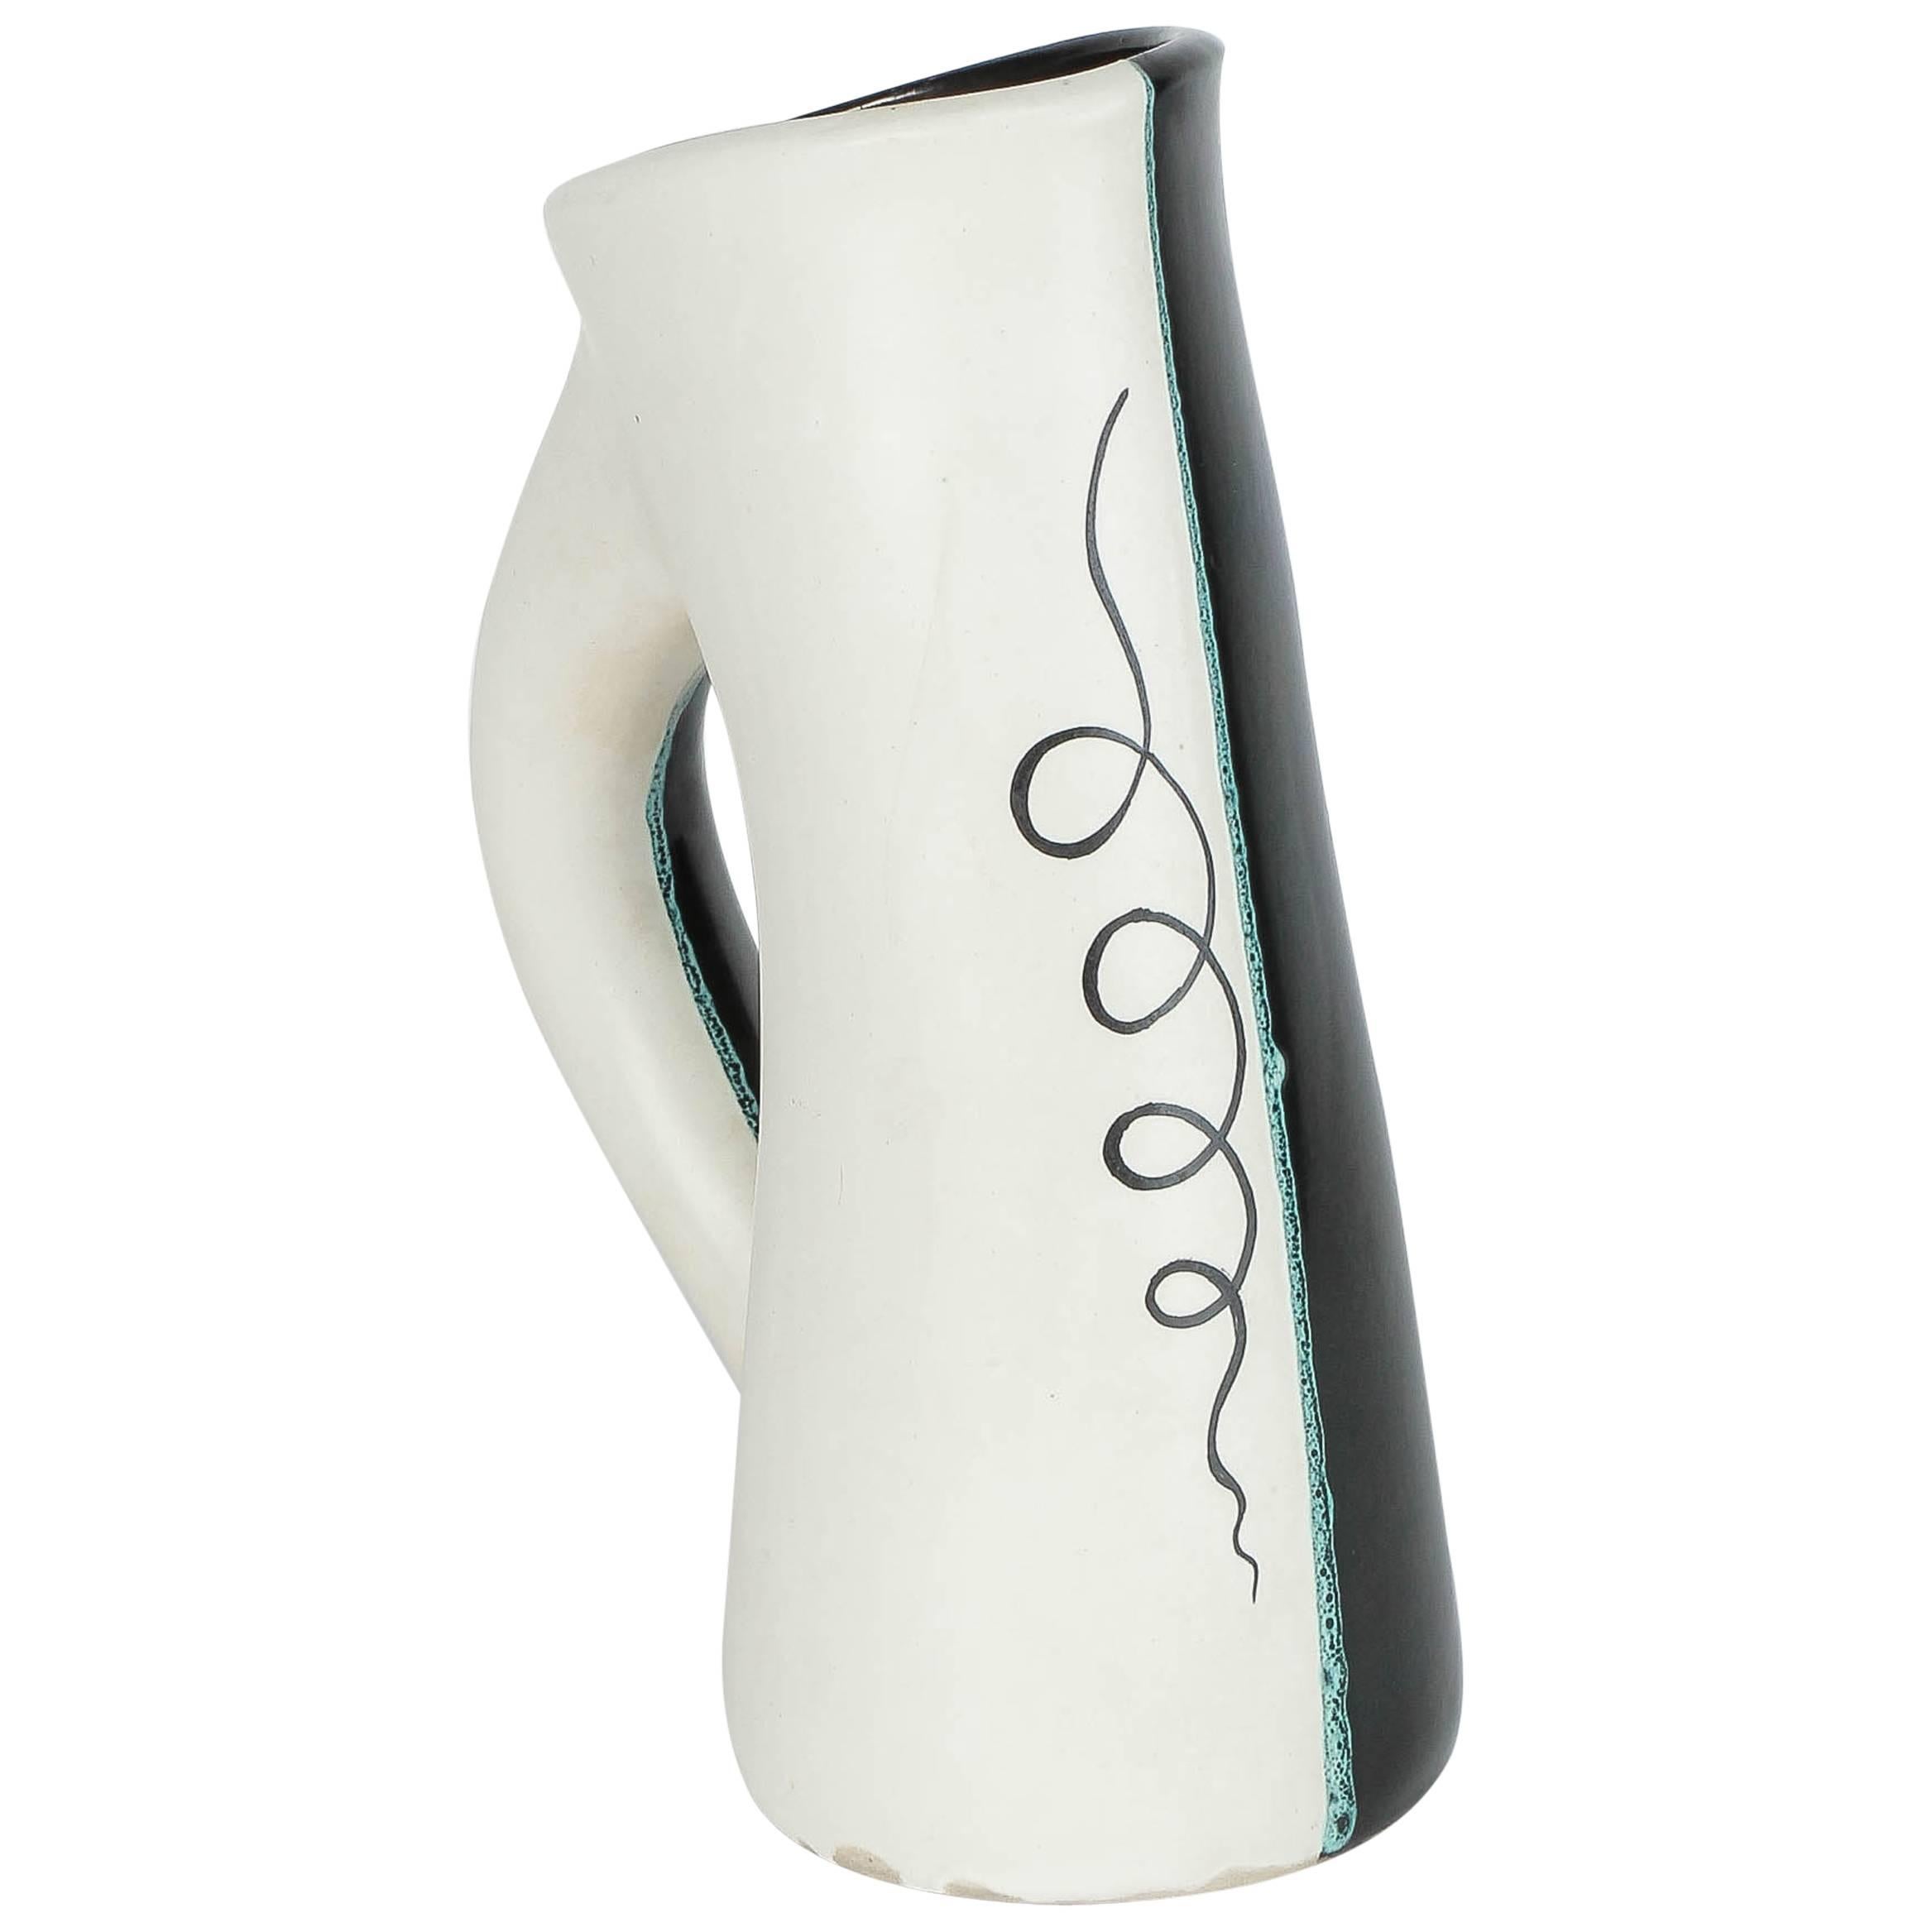 Vallauris Ceramic Pitcher Black and White by Charles René Neveux, 1950s For Sale